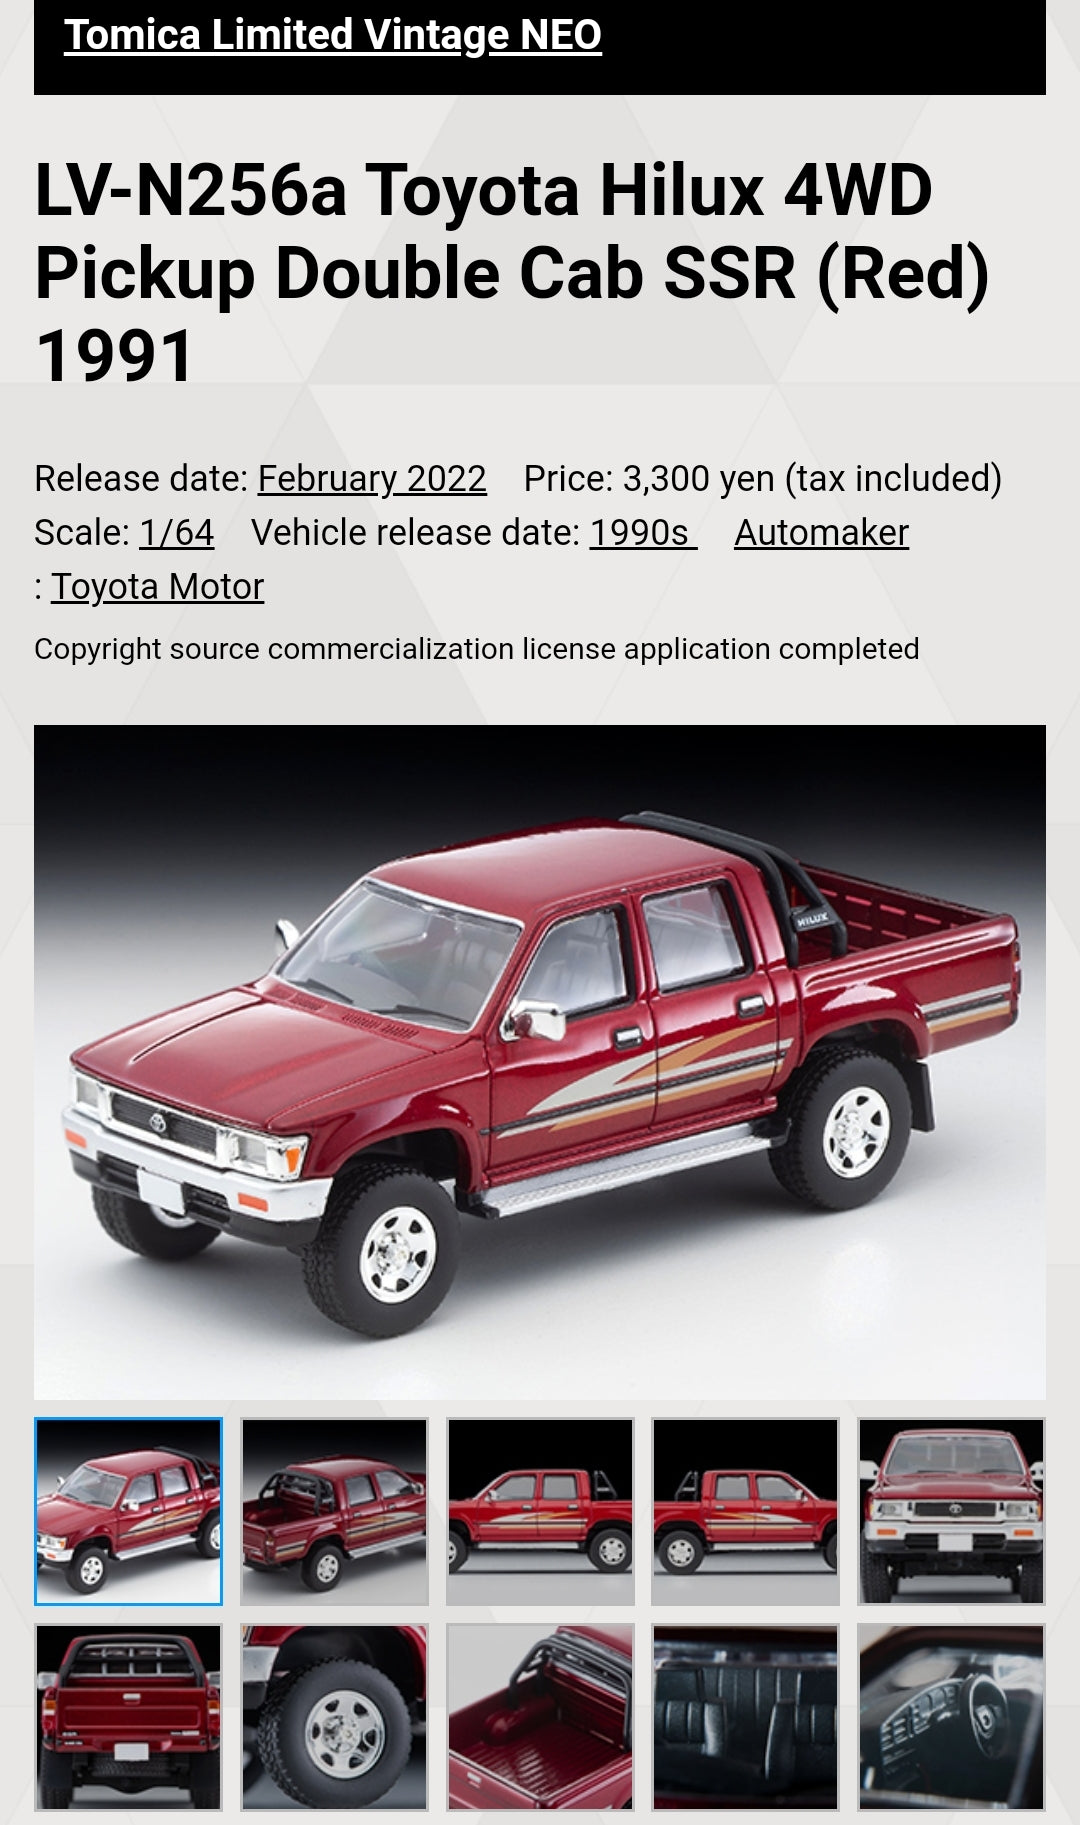 Tomica Limited Vintage Neo
LV-N256a Toyota Hilux 4WD Pickup Double Cab SSR (Red) 1991 Takara Tomy